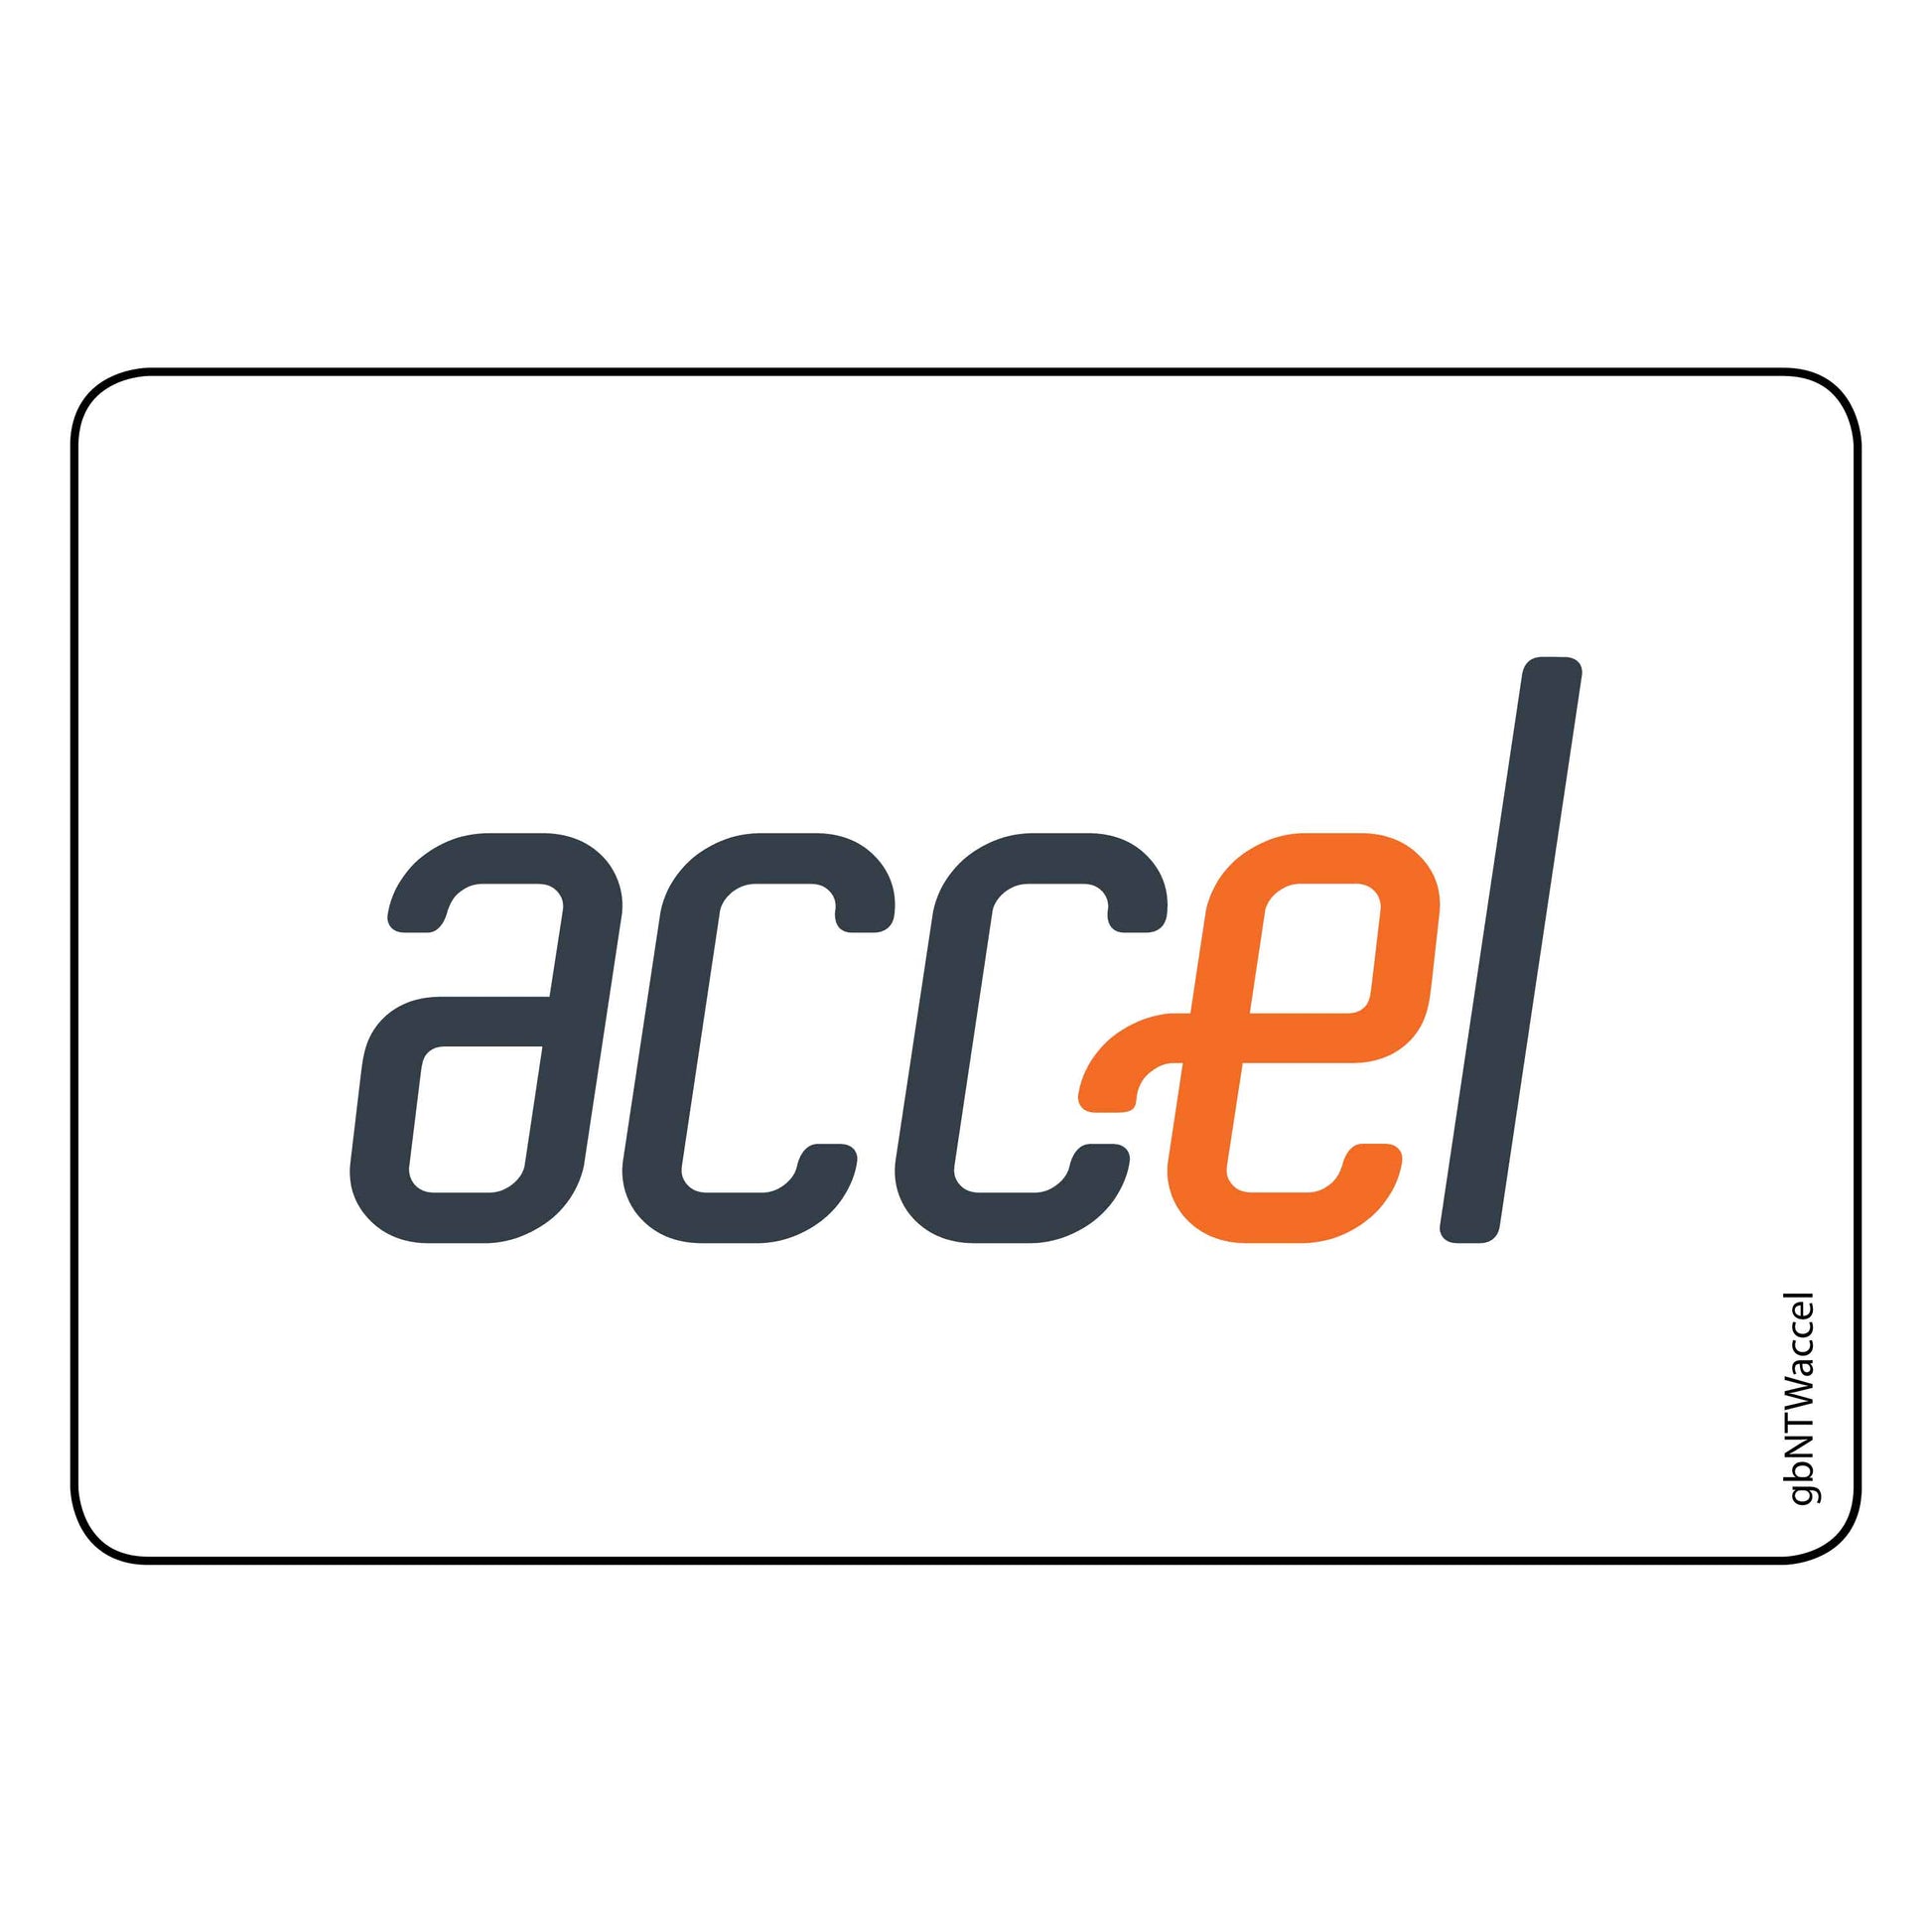 Single Network Decal, Accel. 3 inches by 2 inches in size.